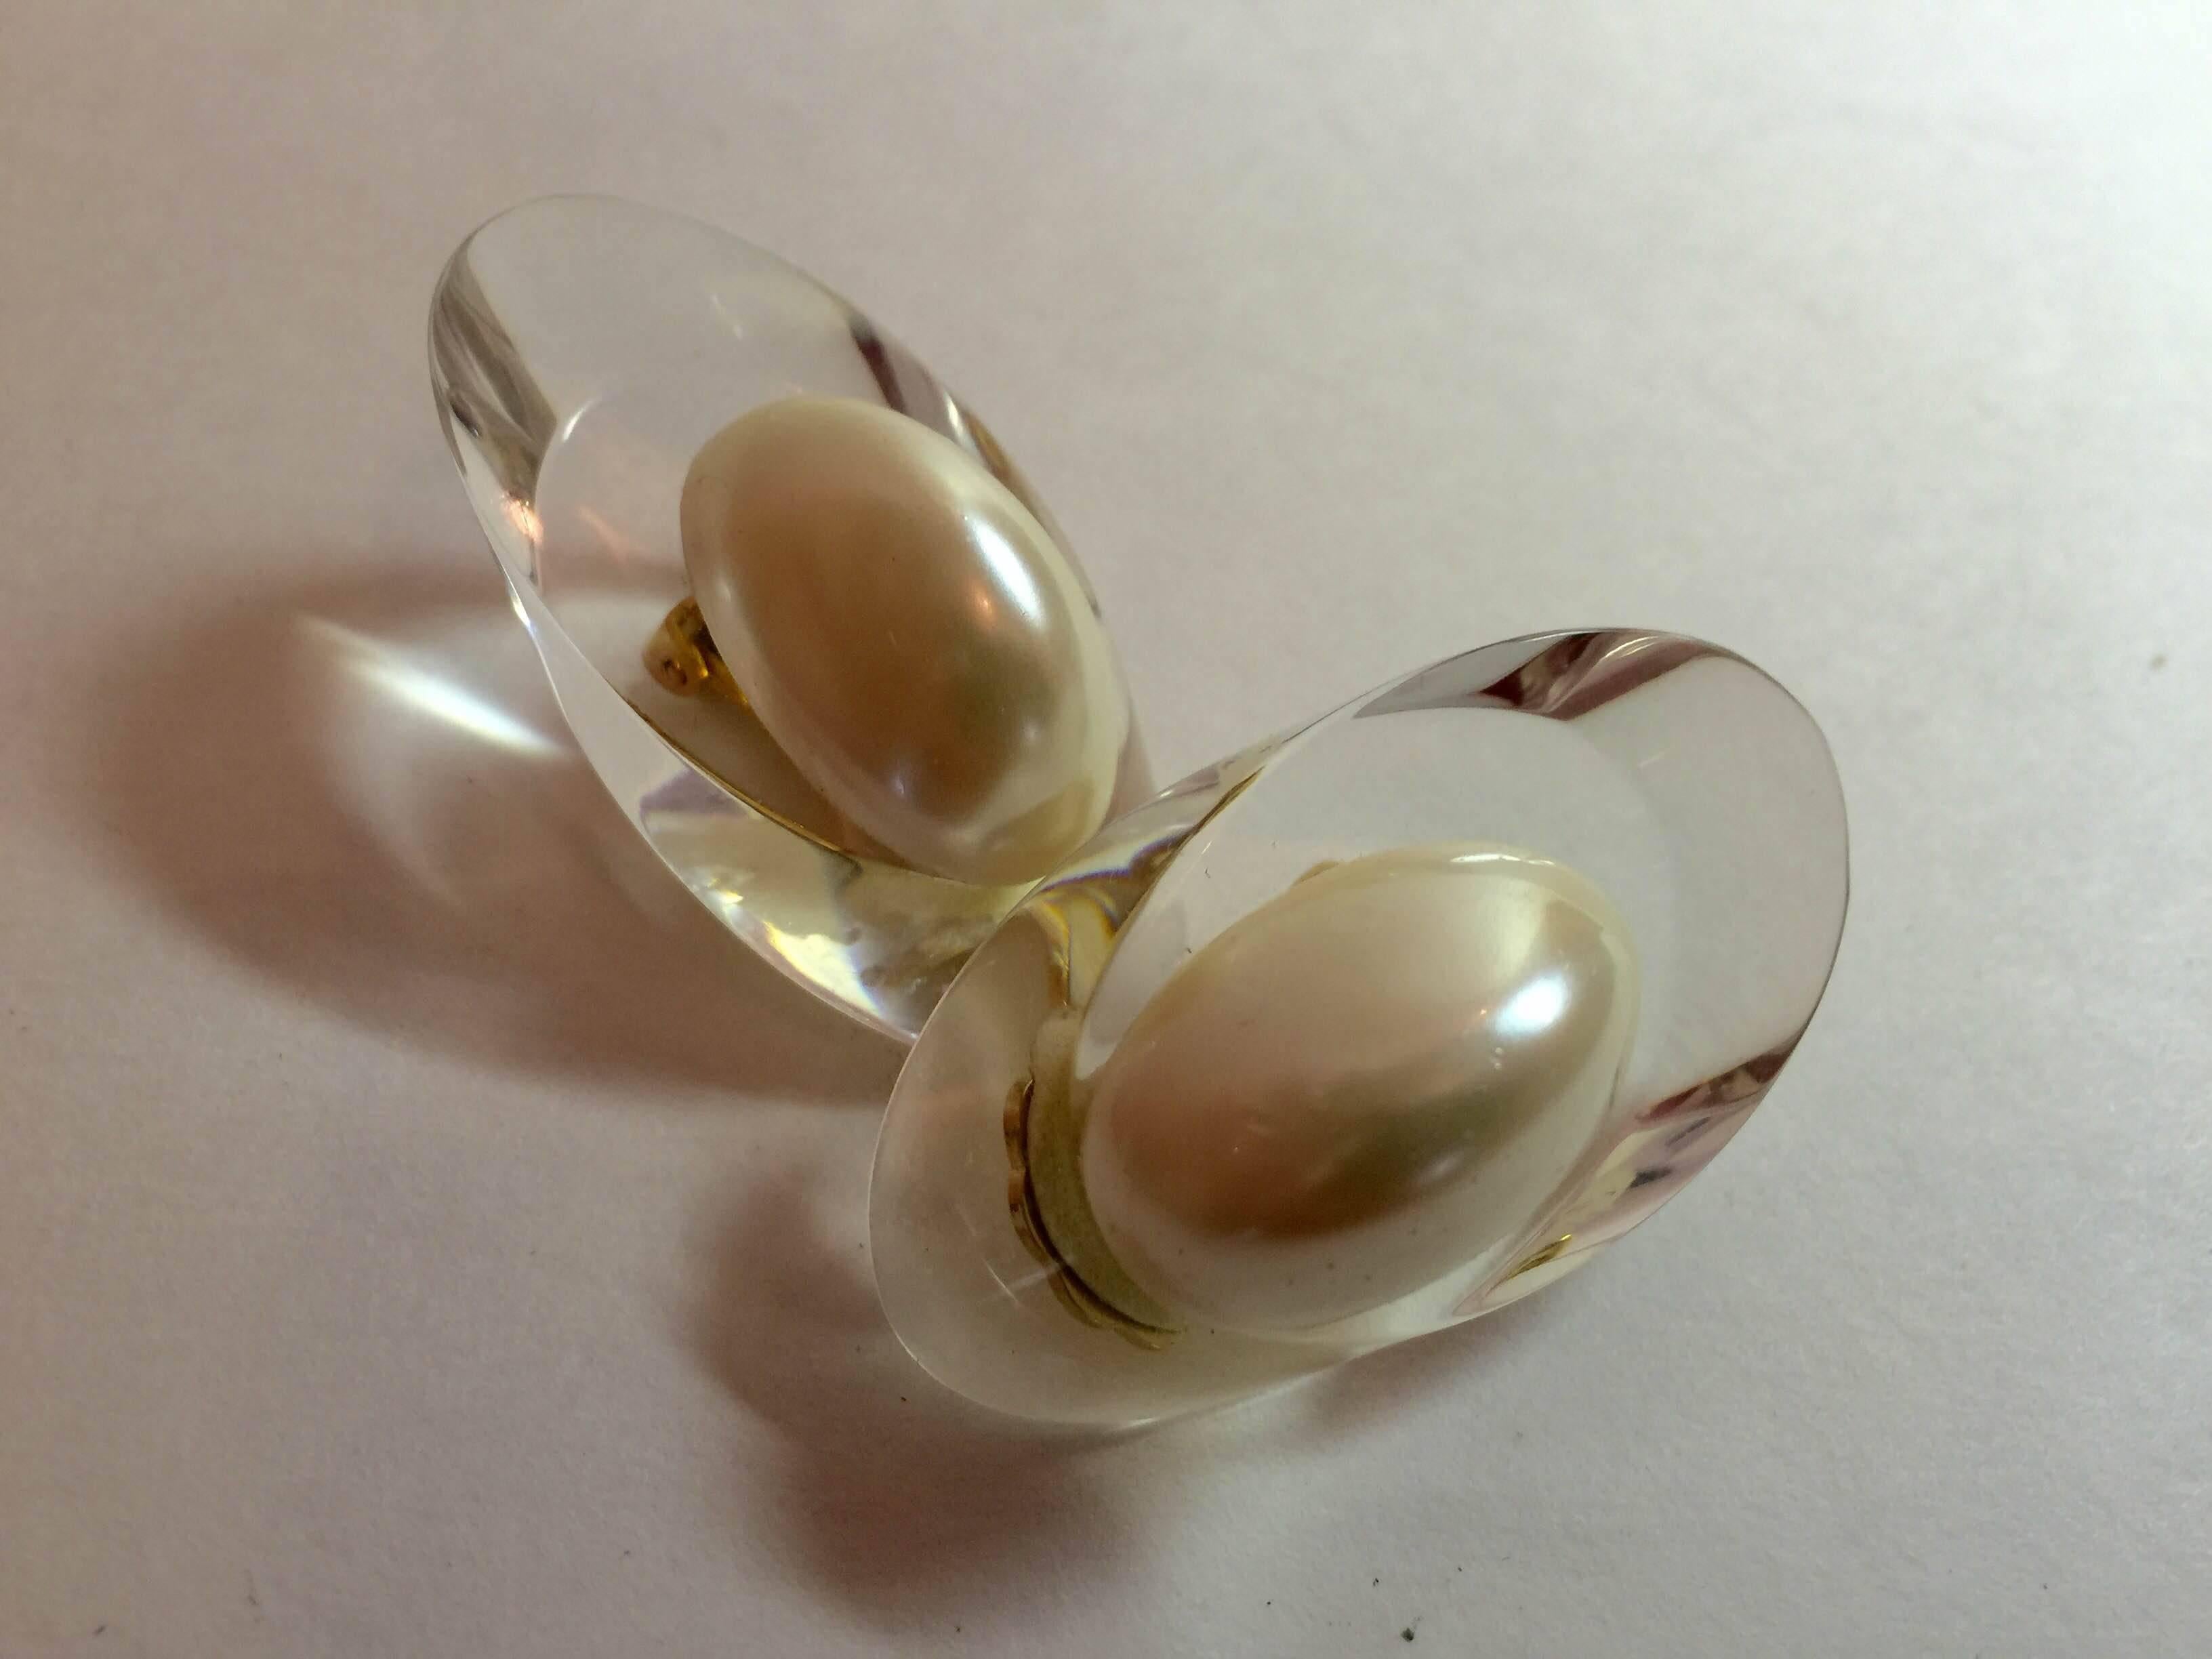 These ACRI-GEMS water clear acrylic and pearl clip on earrings by Judith Hendler are of the late 1970's early 1980's era. This shape is referred to as 'fingernail' flattened long clear acrylic ovals, and have a long flat backed oval pearl as